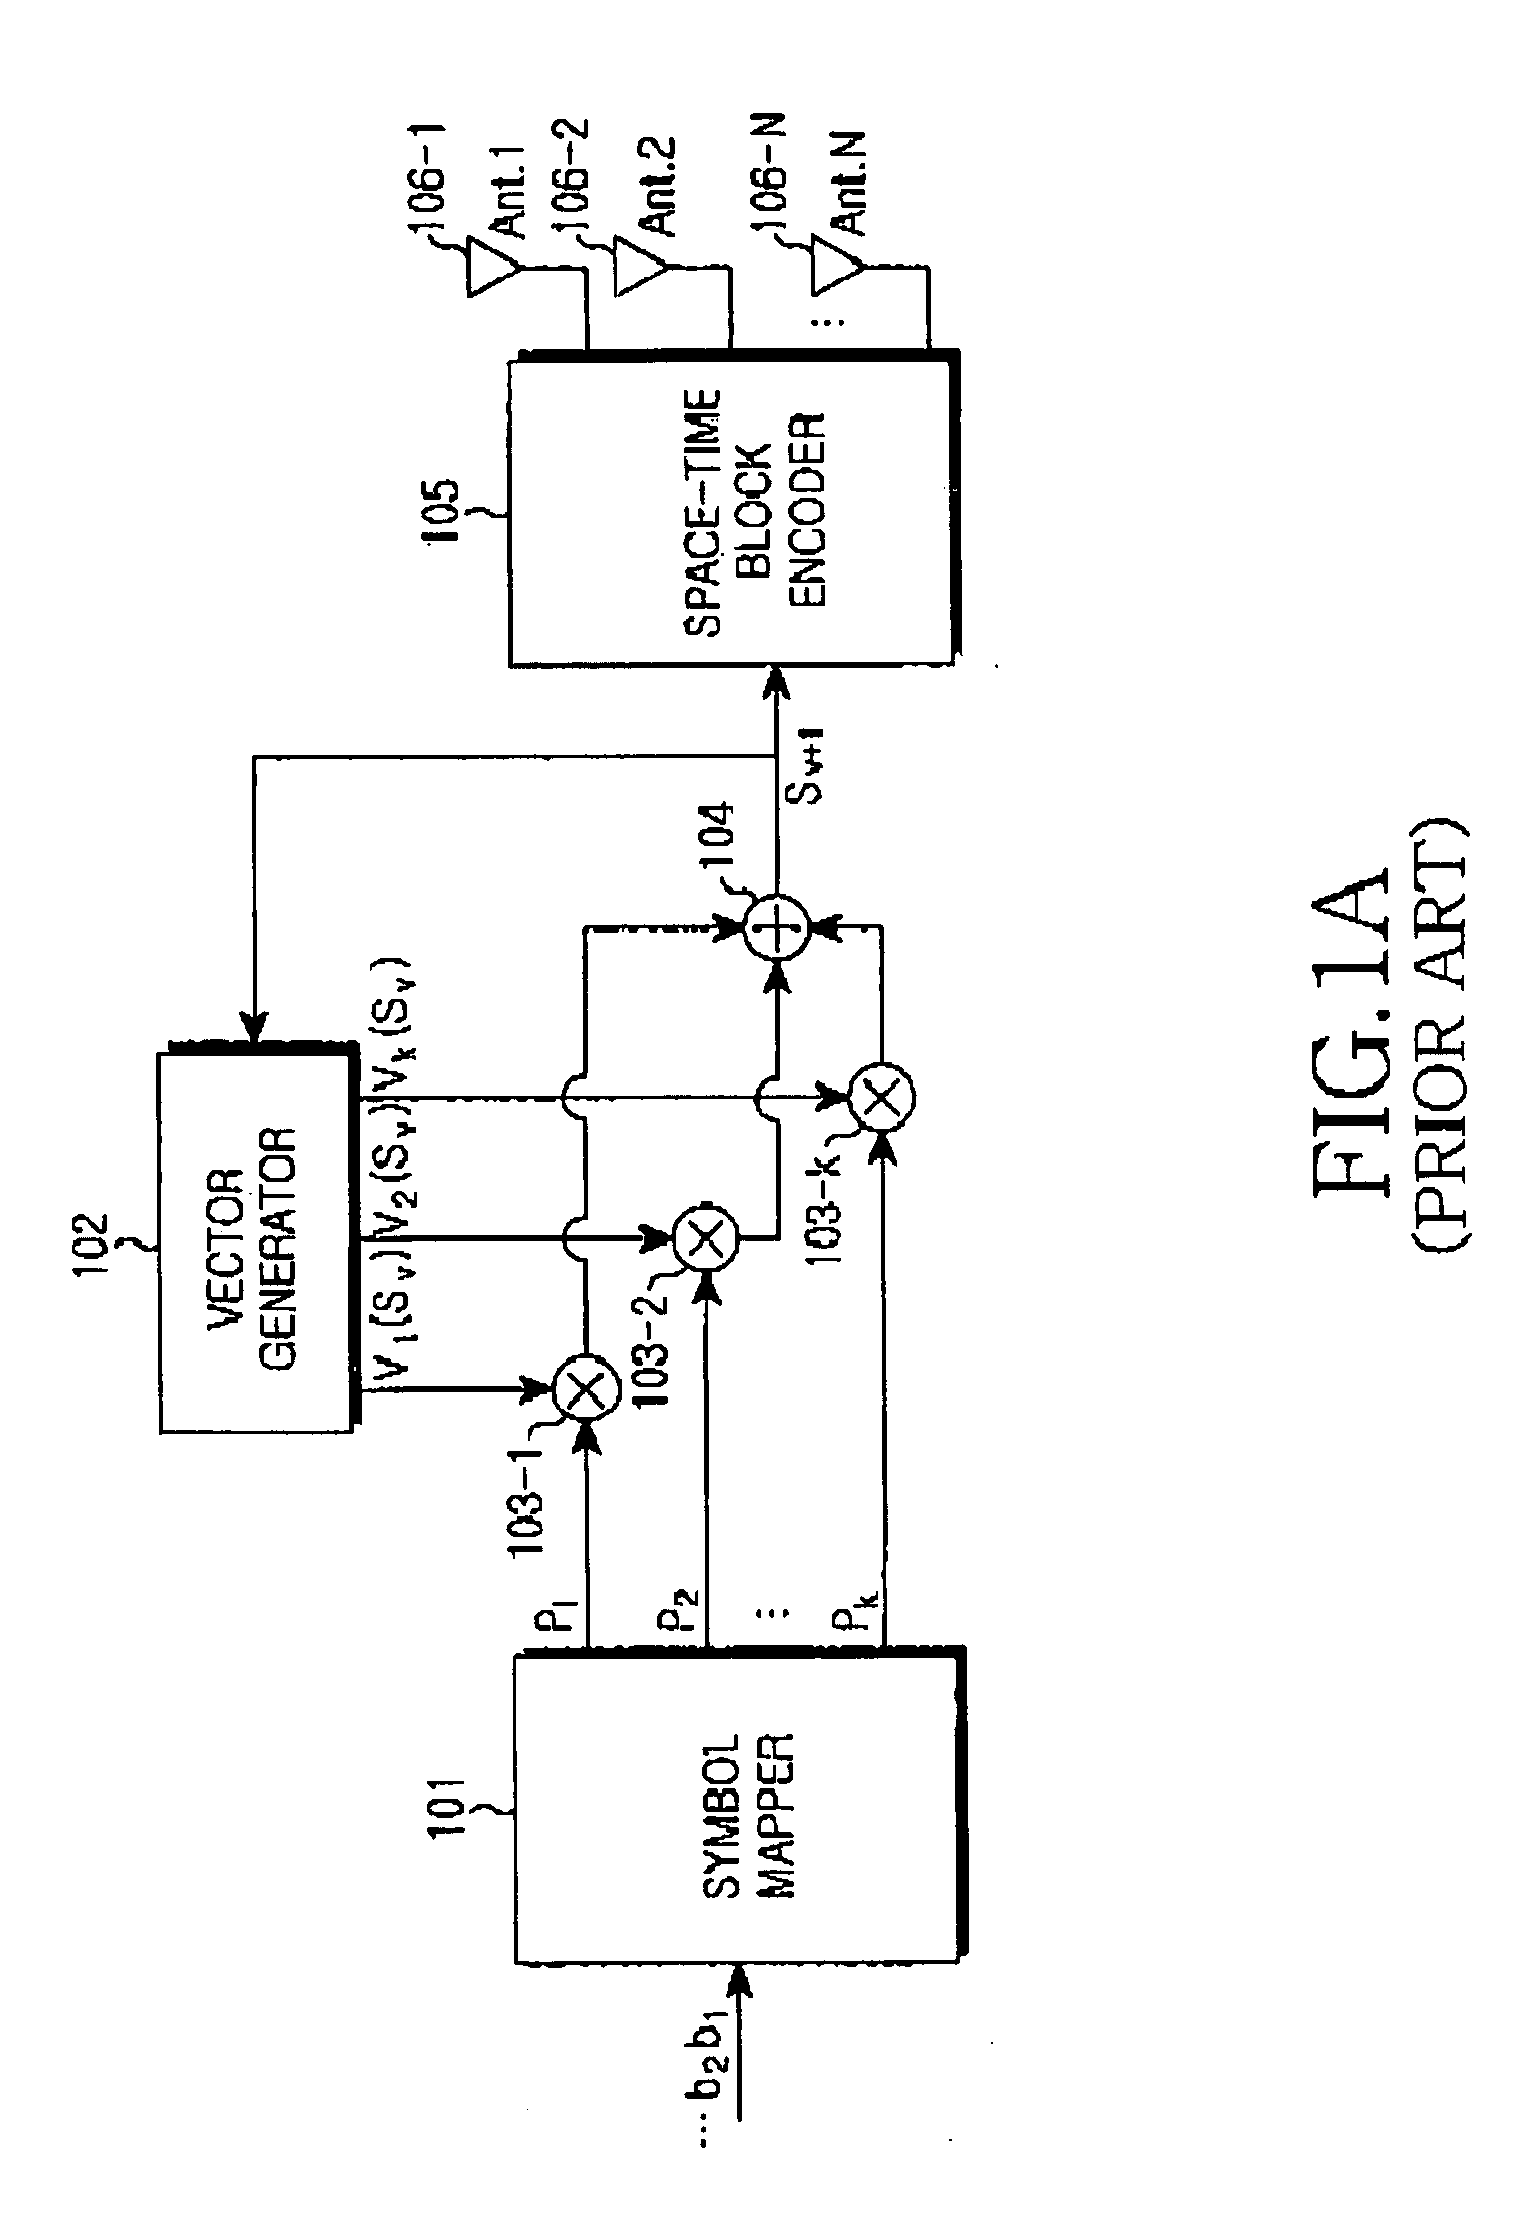 Differential space-time block coding apparatus using eight or less transmit antennas